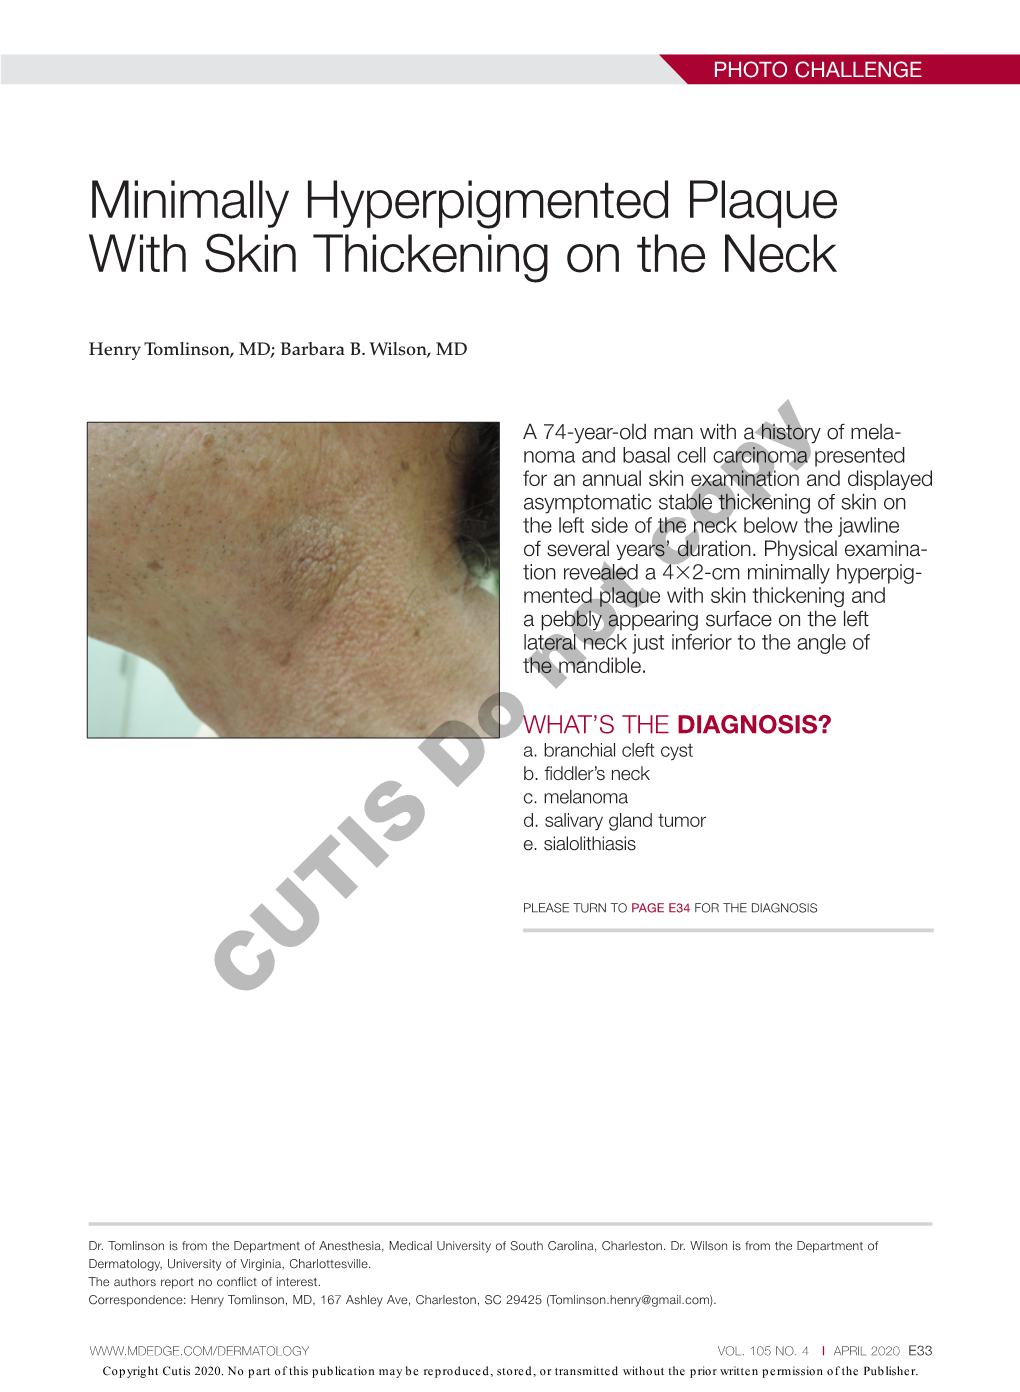 Minimally Hyperpigmented Plaque with Skin Thickening on the Neck